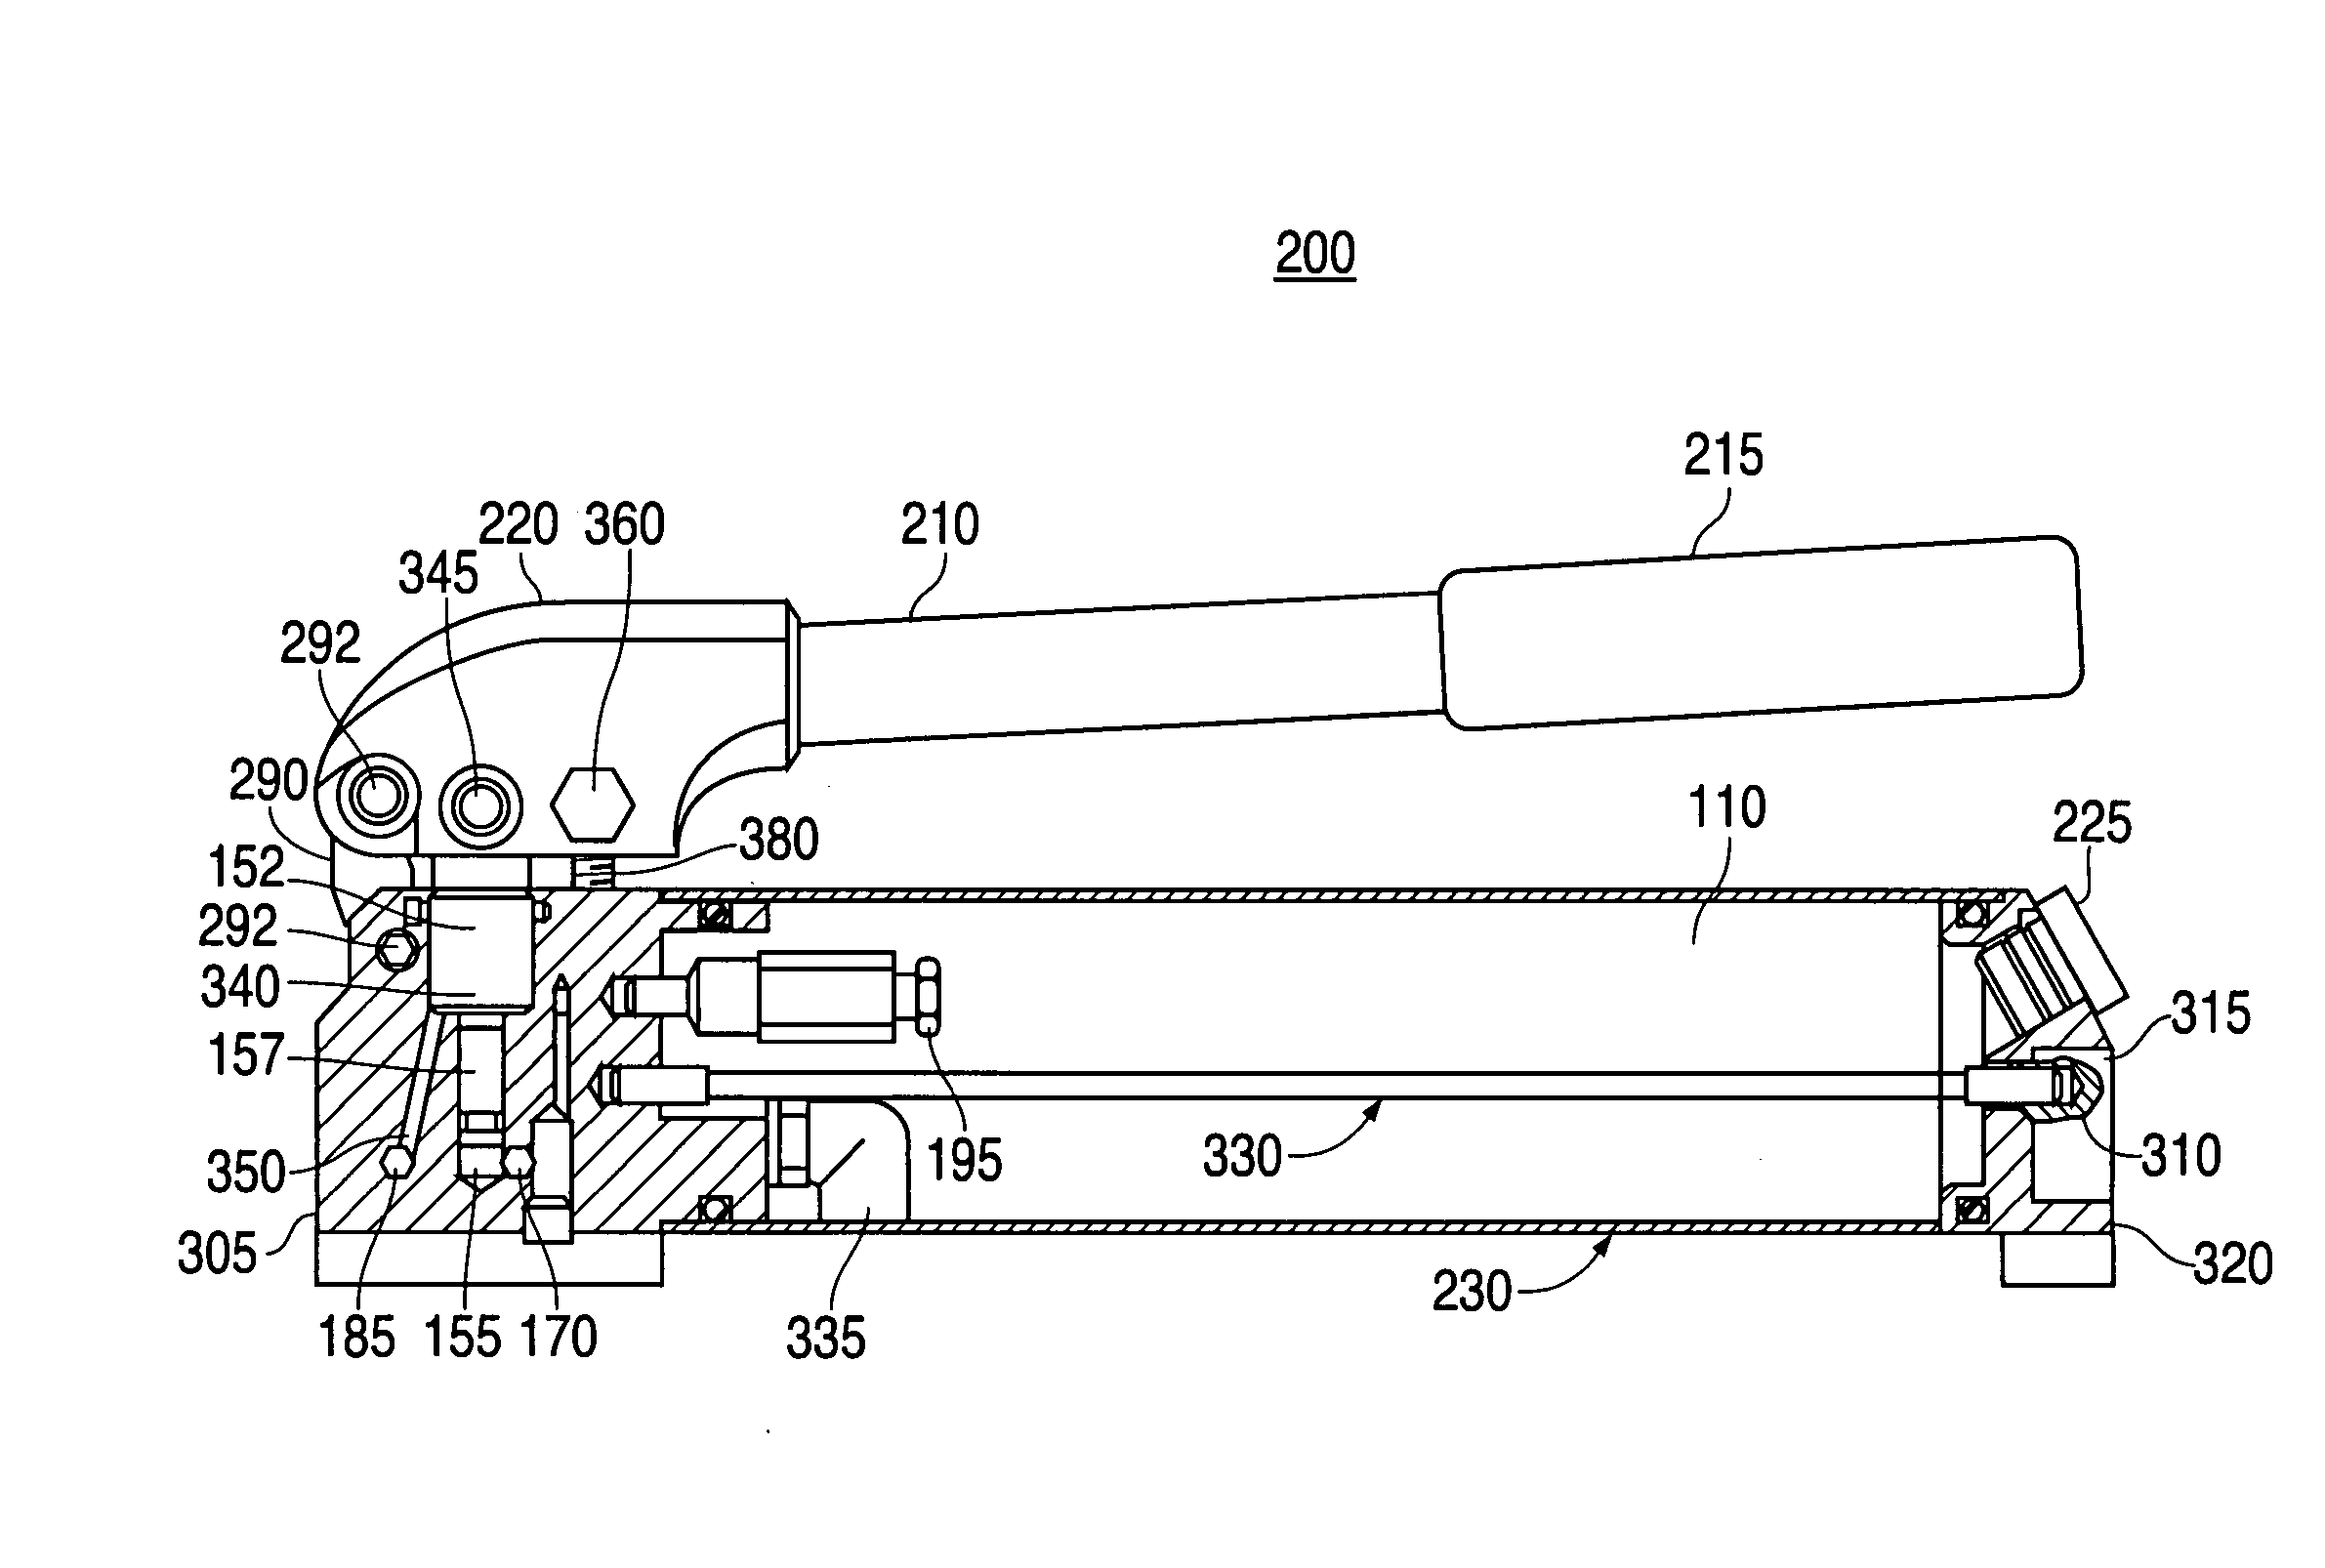 Hydraulic hand pump with pivoting links